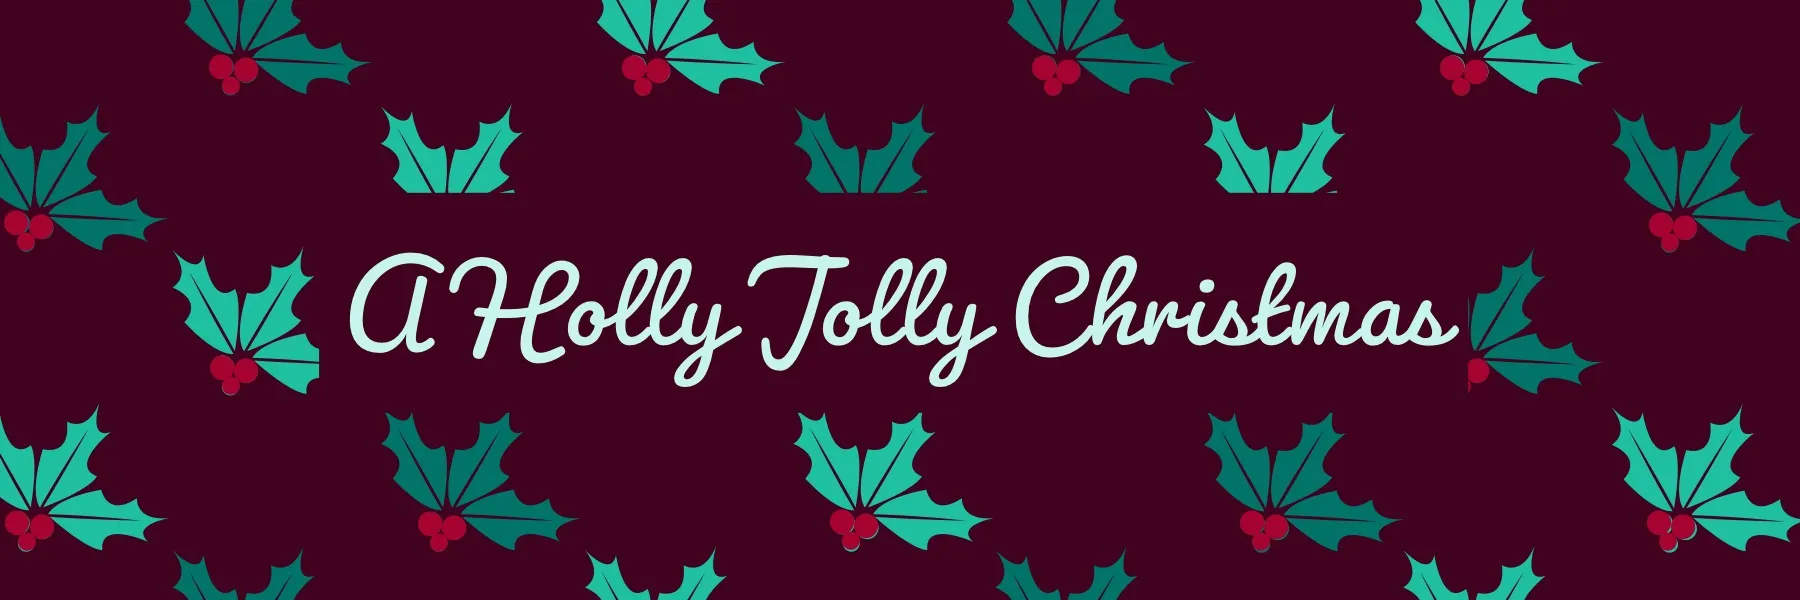 Claret and Blue Holly Jolly Christmas Twitter Header